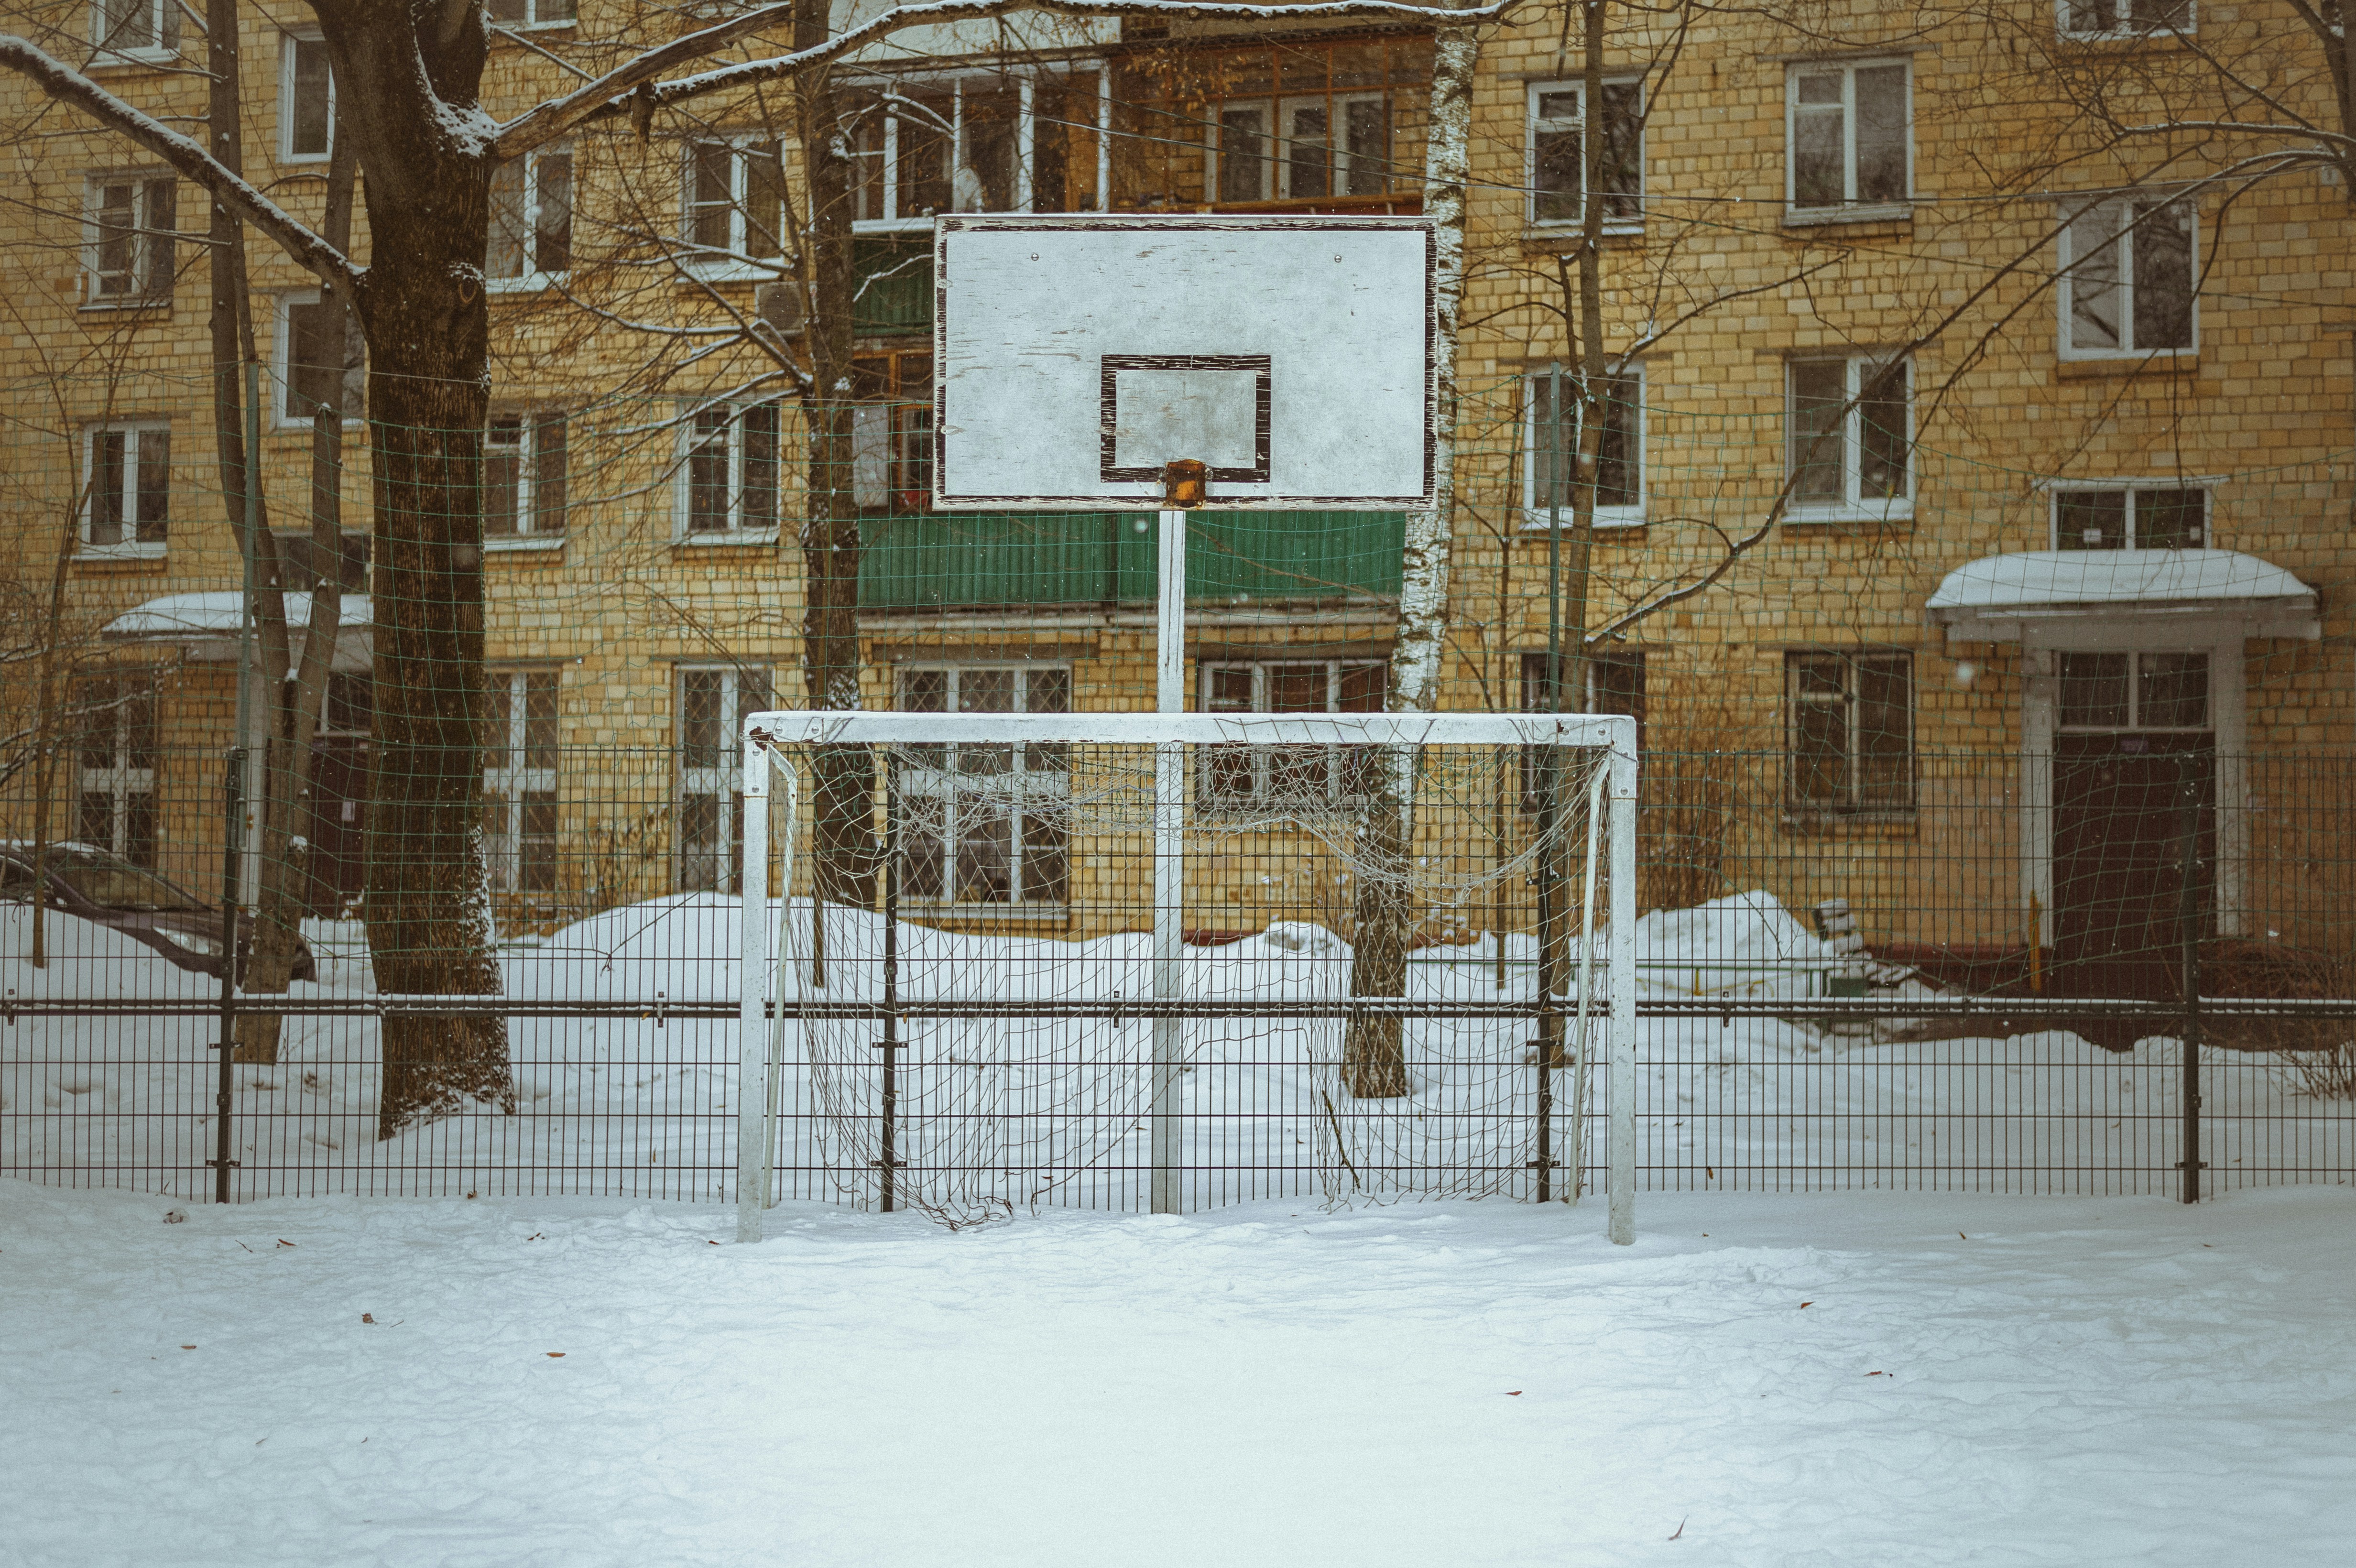 Playground in the yard of an apartment building. Winter, snow.